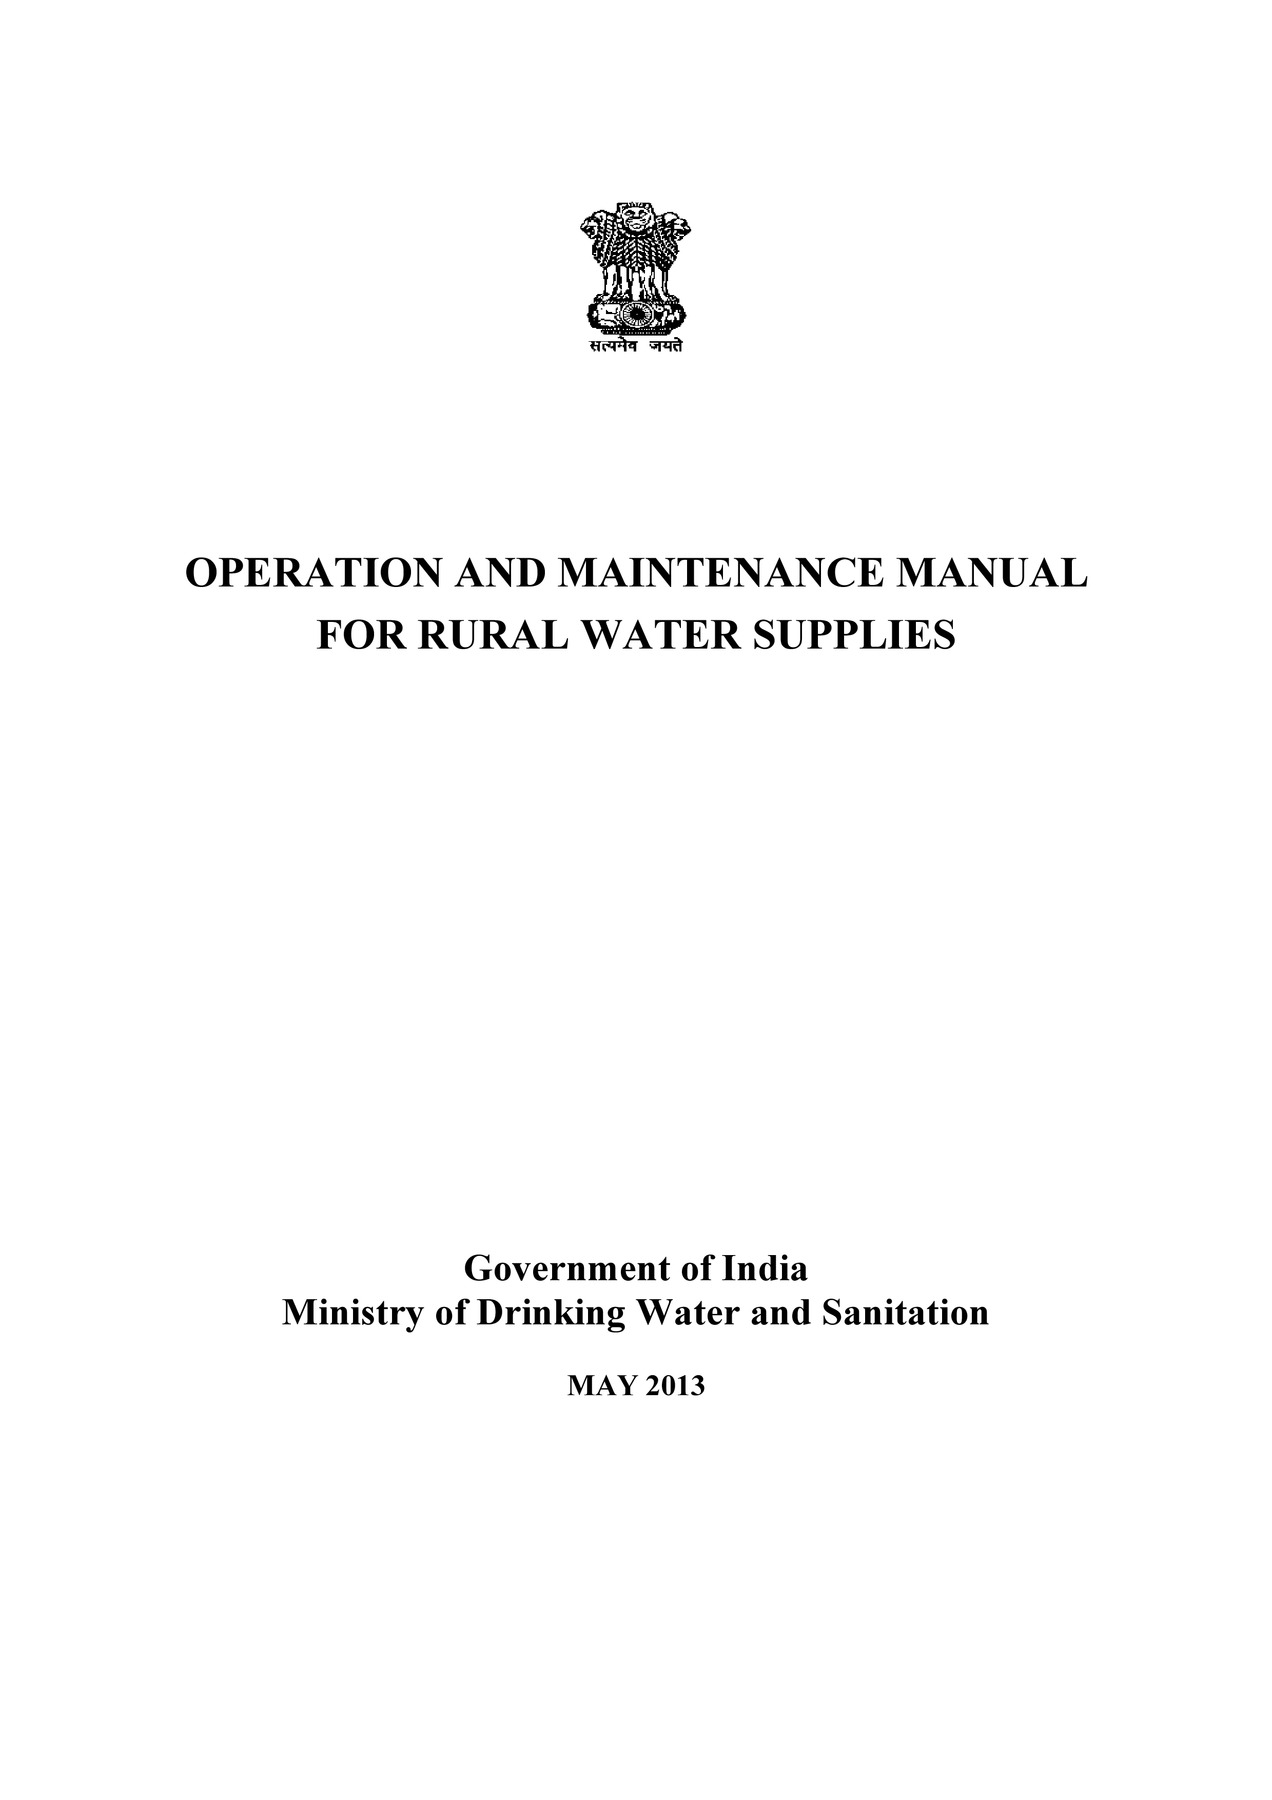 OHSR Tank Scheme 2022 | Operation and Maintenance Manual for Rural Water Supply Systems PDF